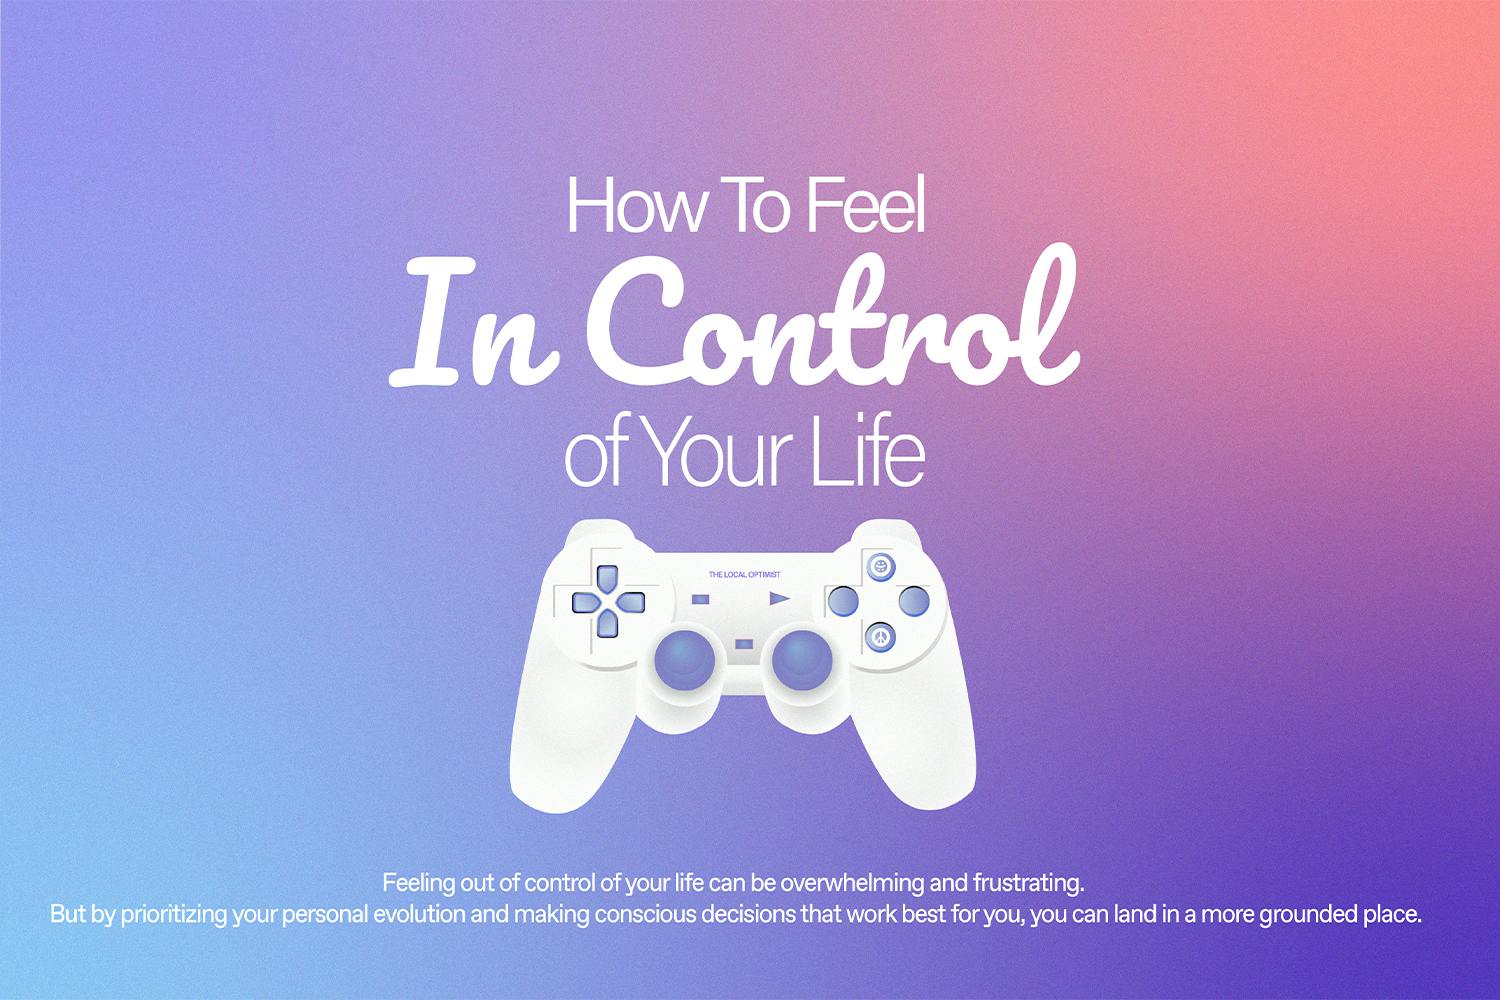 How To Feel In Control of Your Life